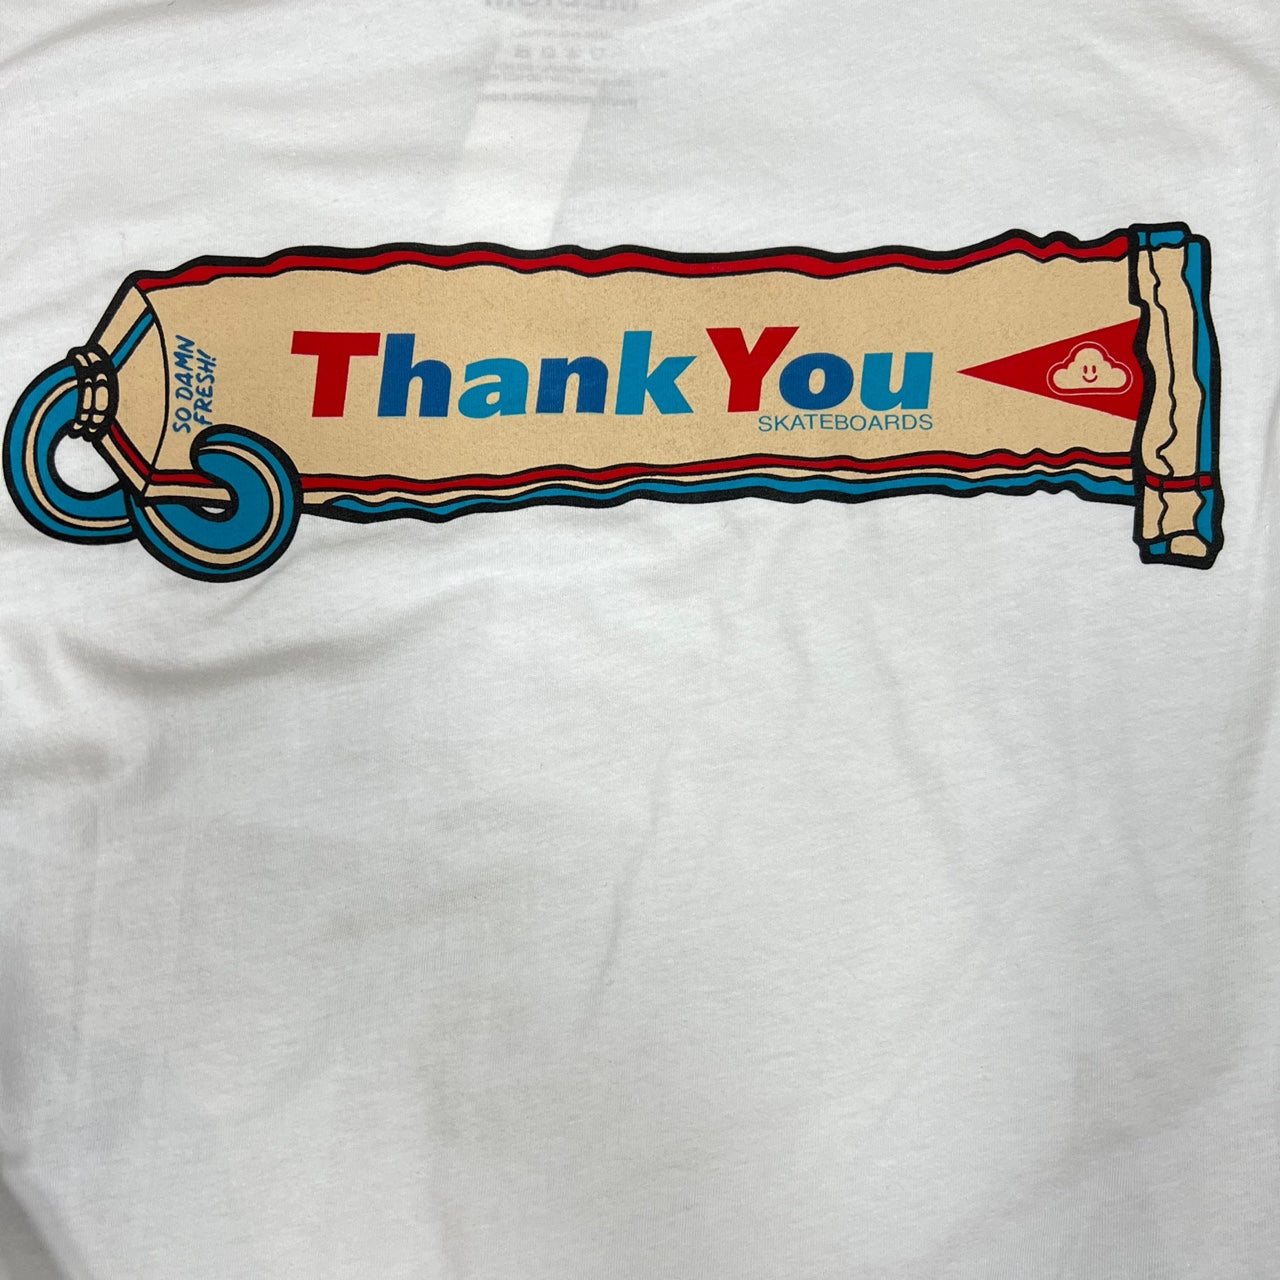 THANK YOU Toothpaste T-Shirt